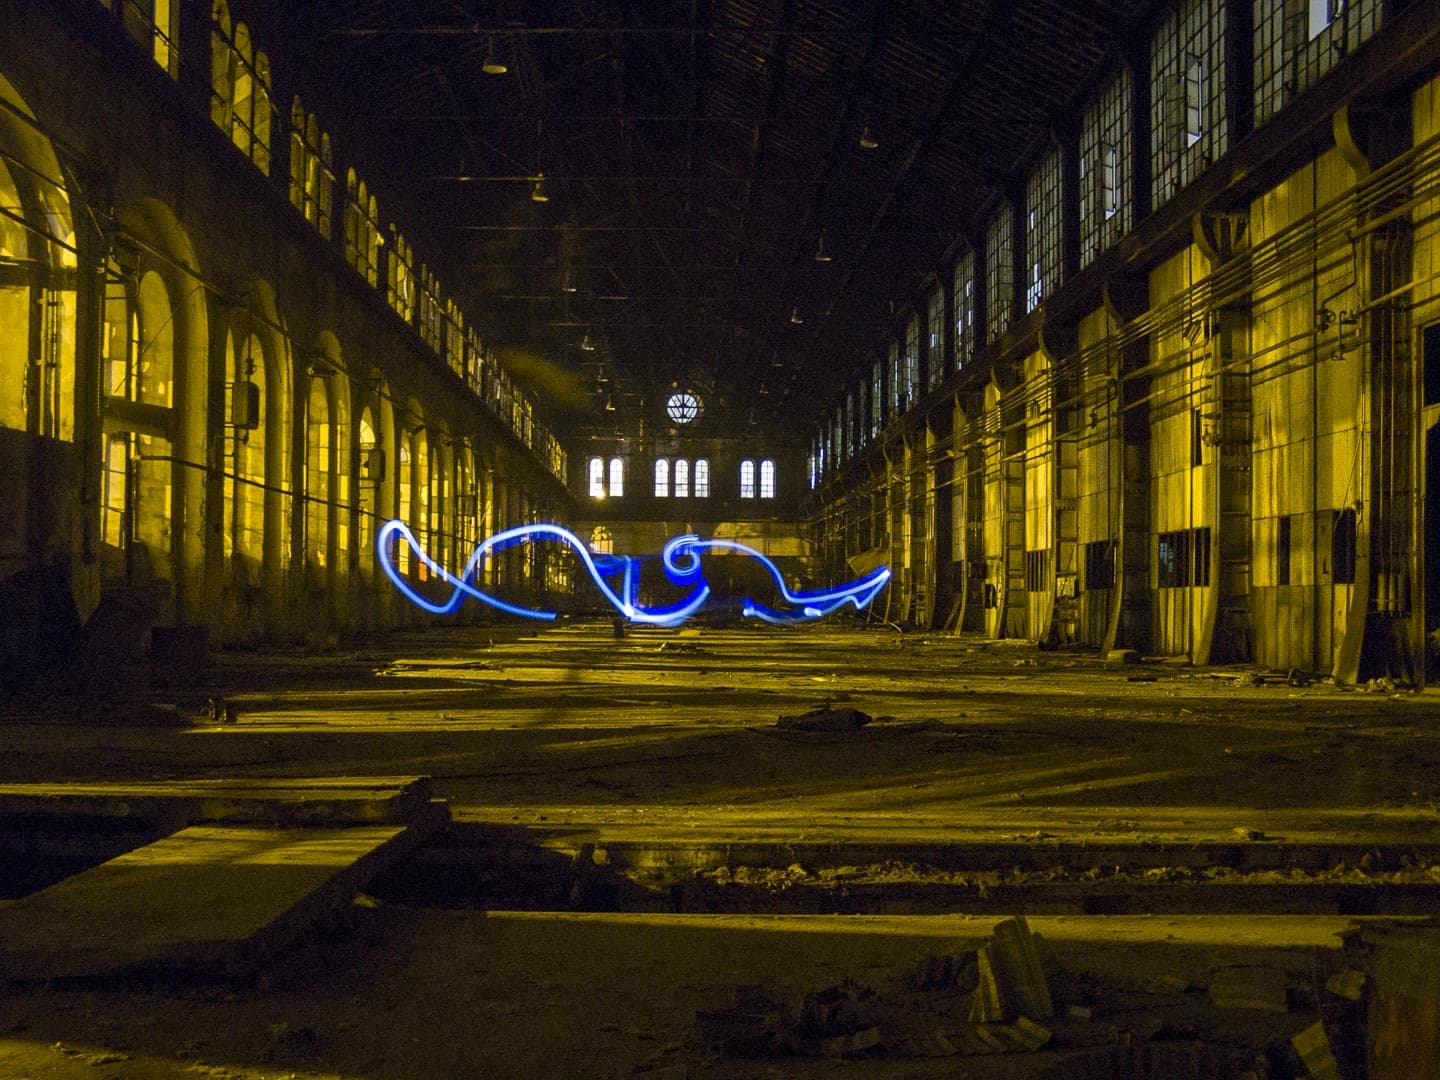 Light Painting at the Abandoned Train Repairing Workshop in Turin, Italy